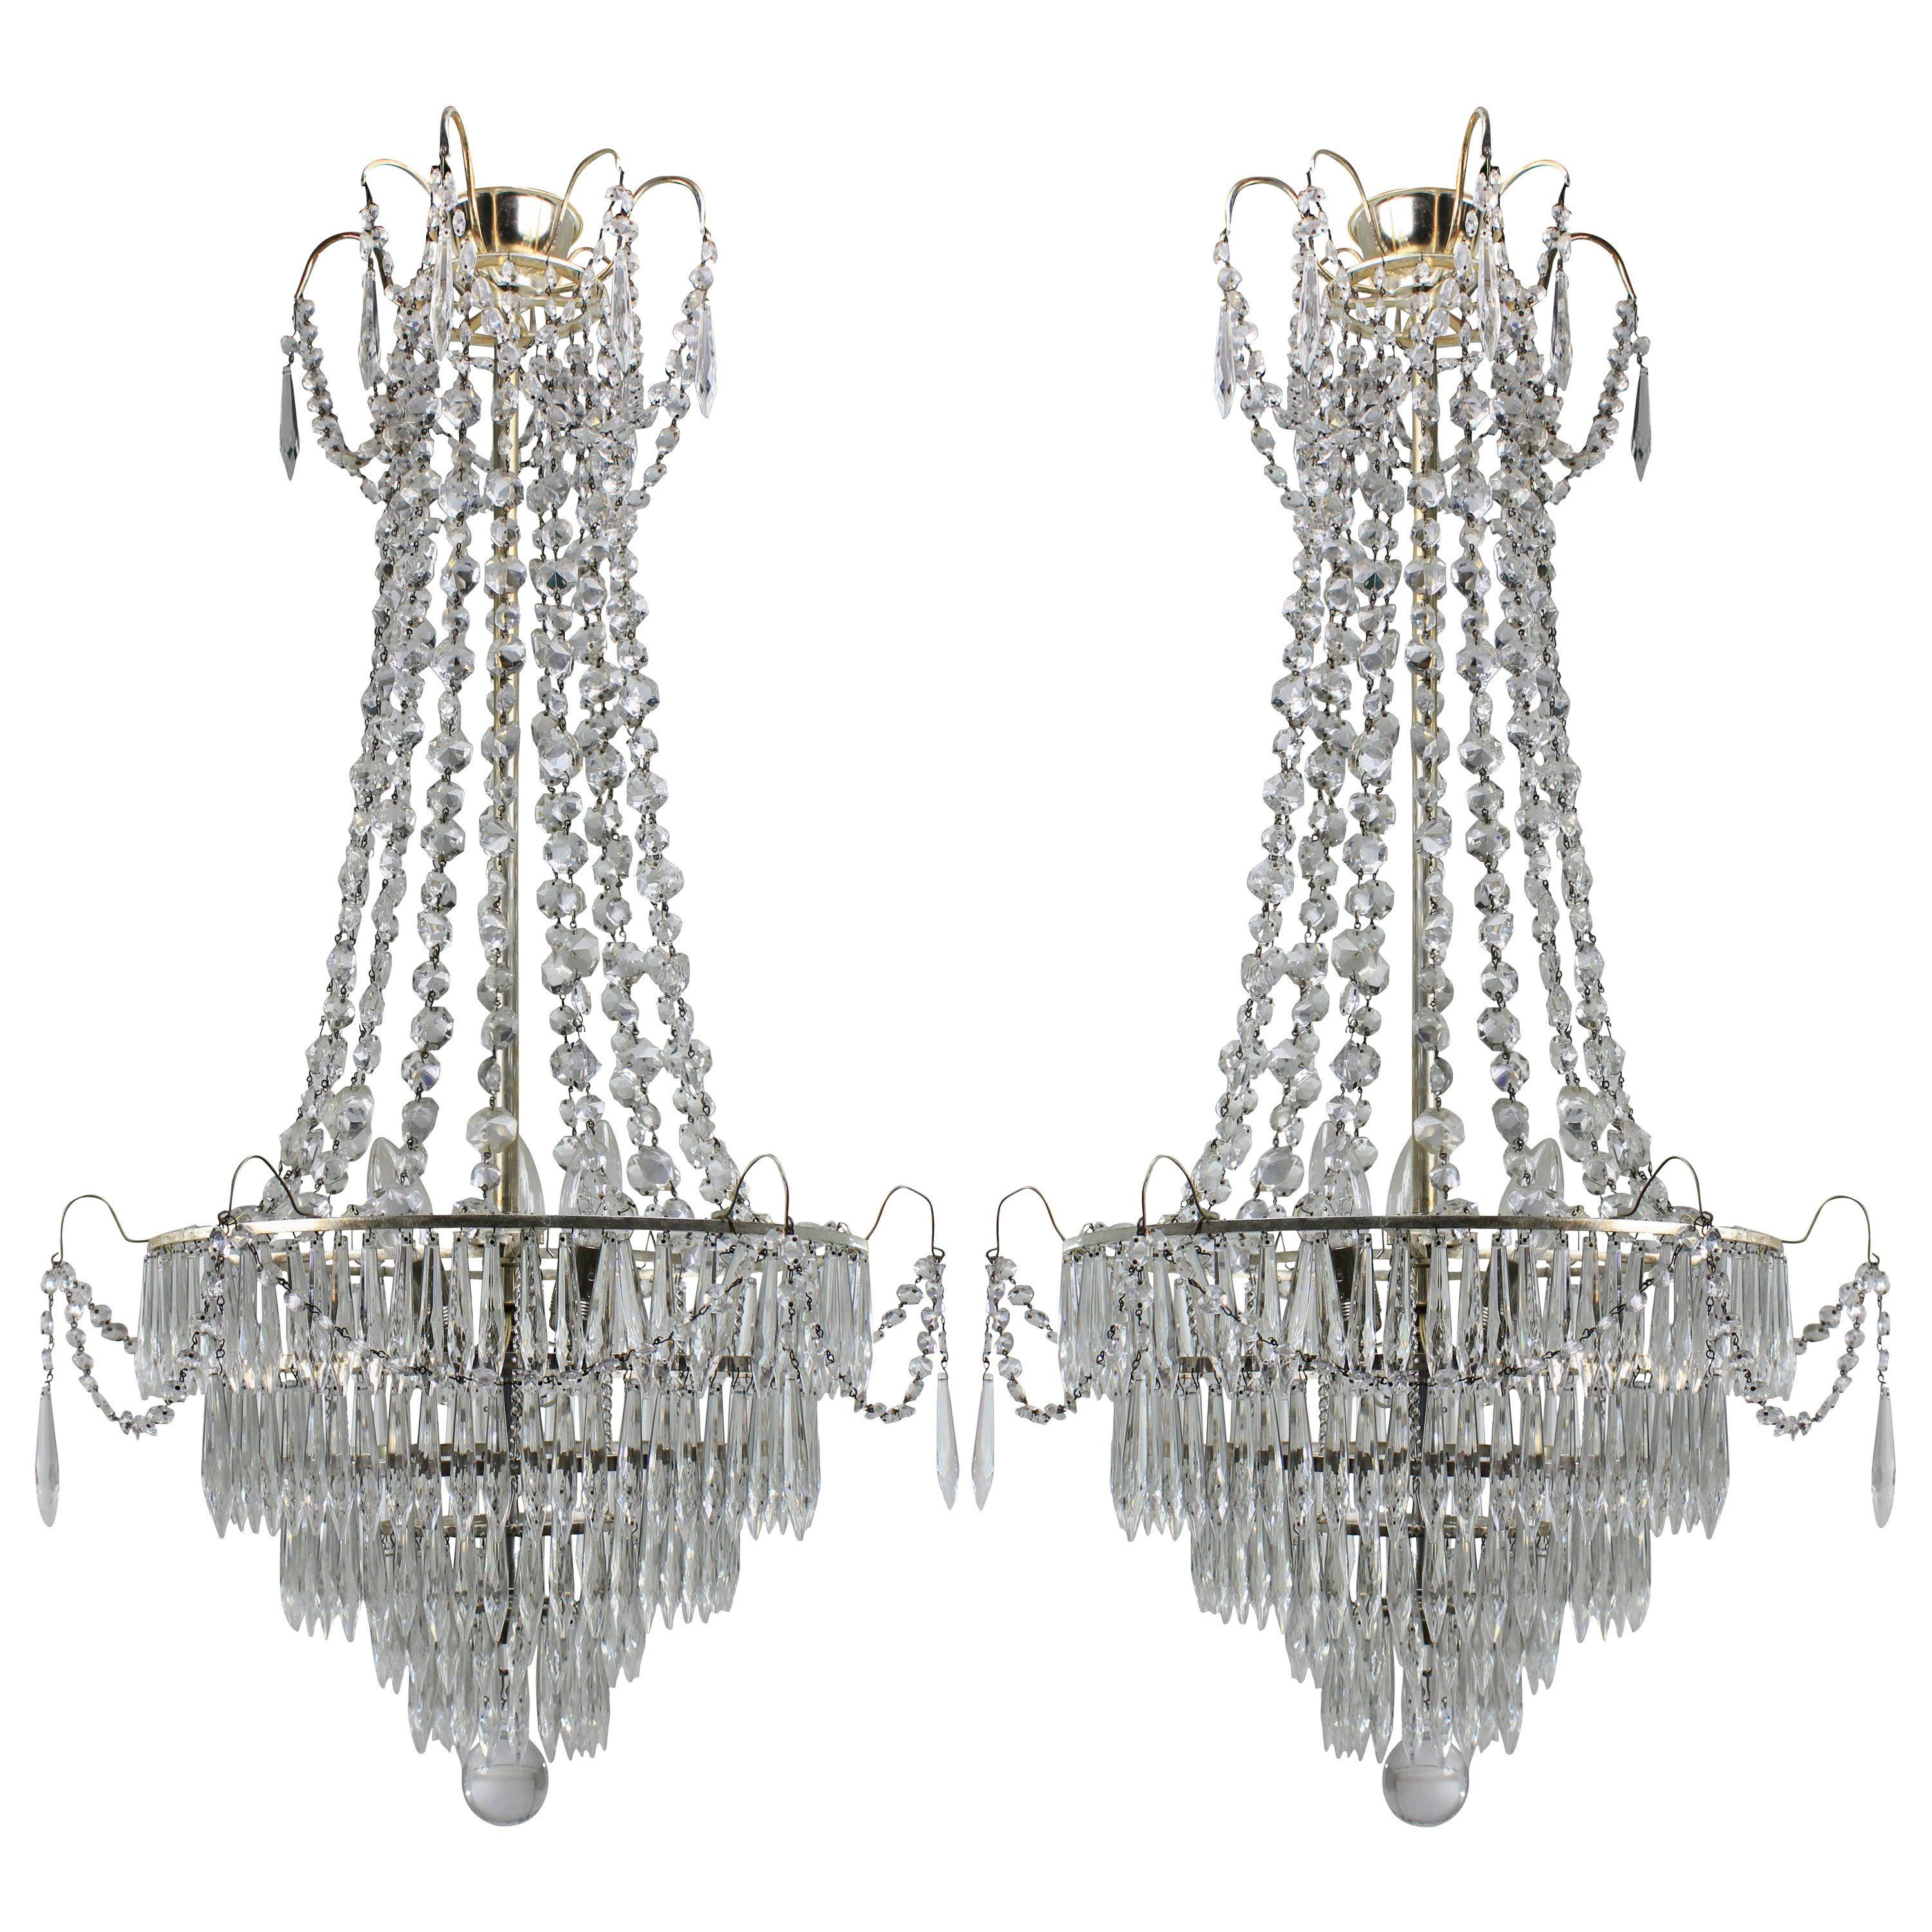 Pair of Swedish Tent and Waterfall Chandeliers